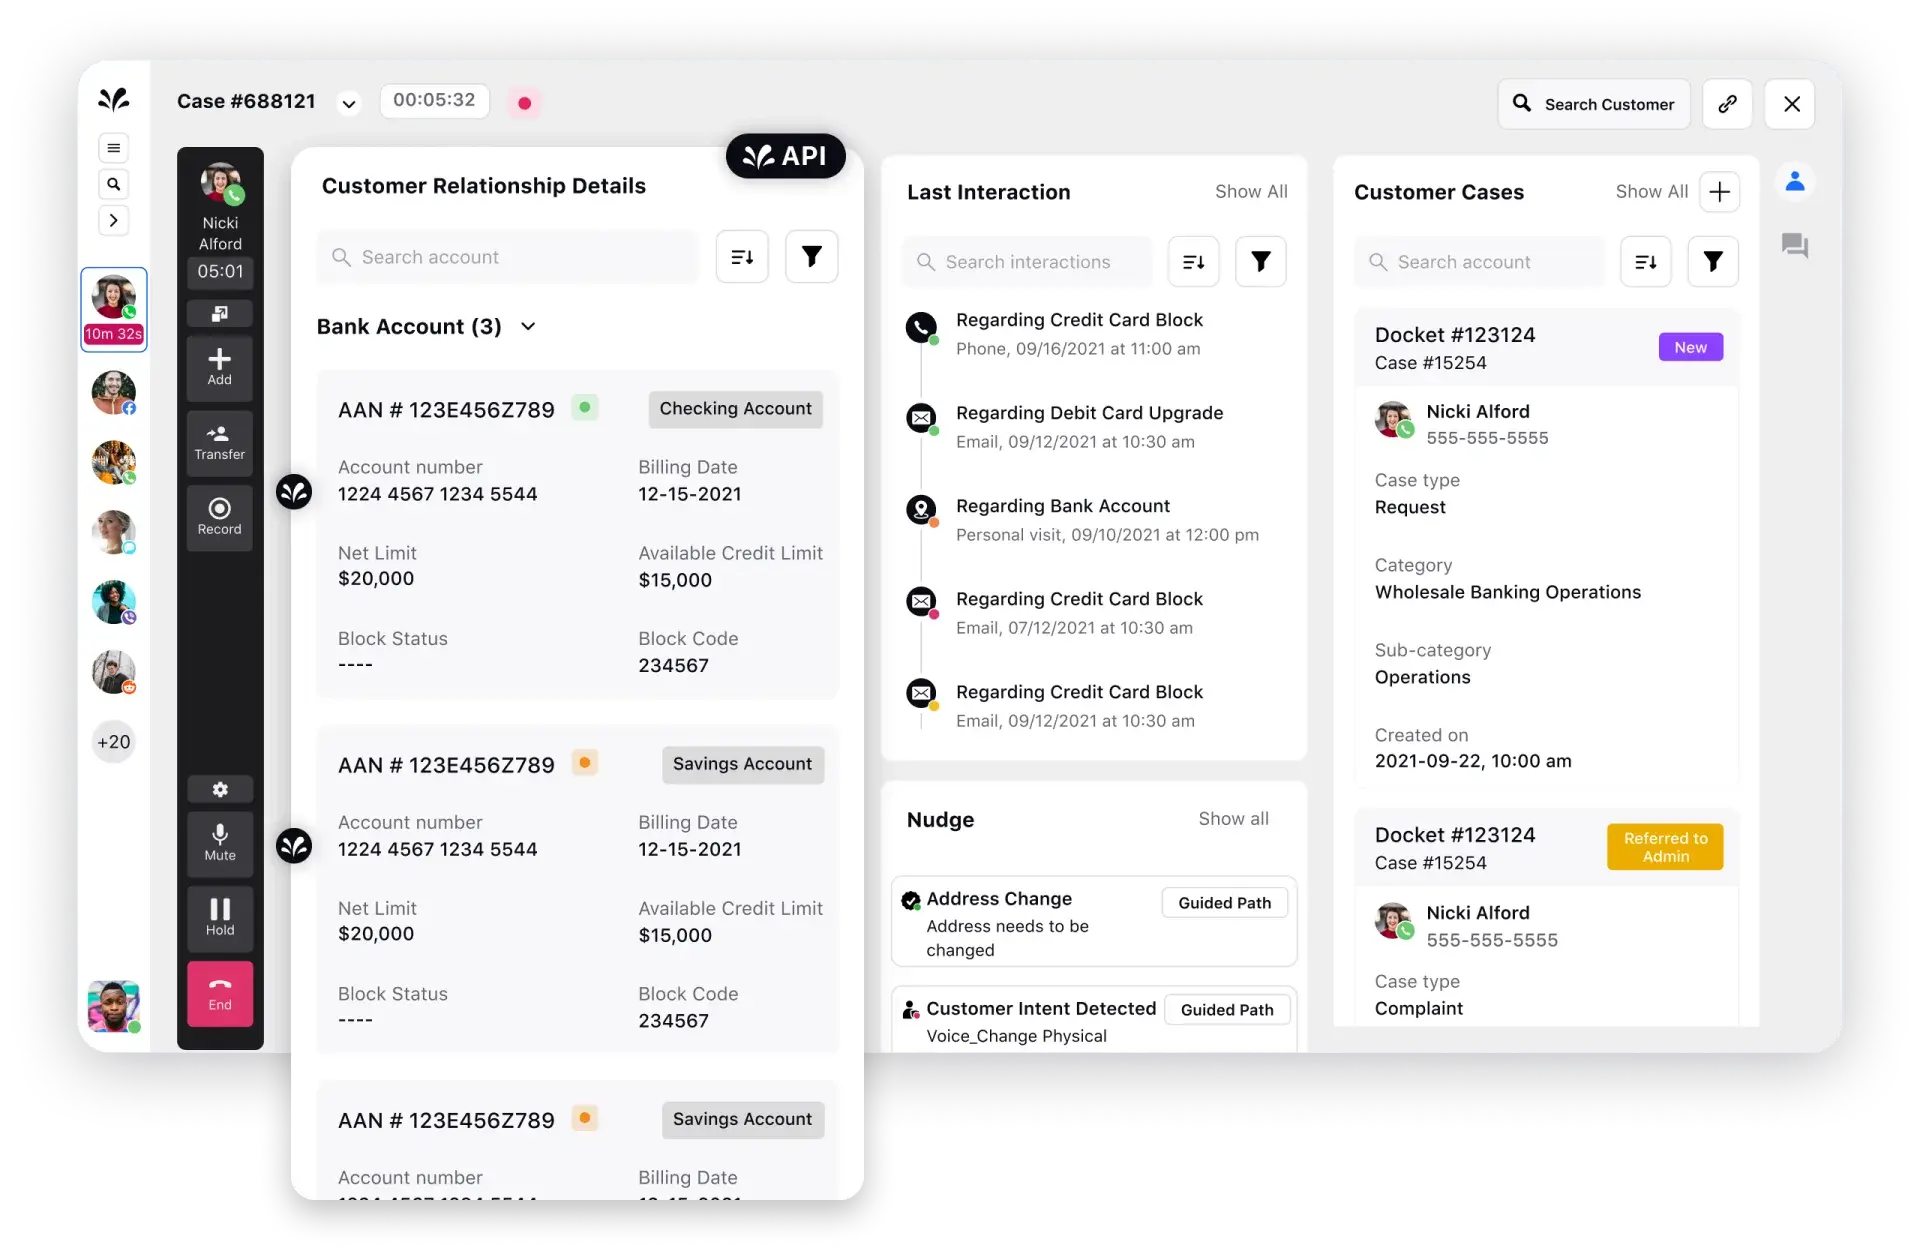 Sprinklr outbound voice dashboard with customer relationship details pane.